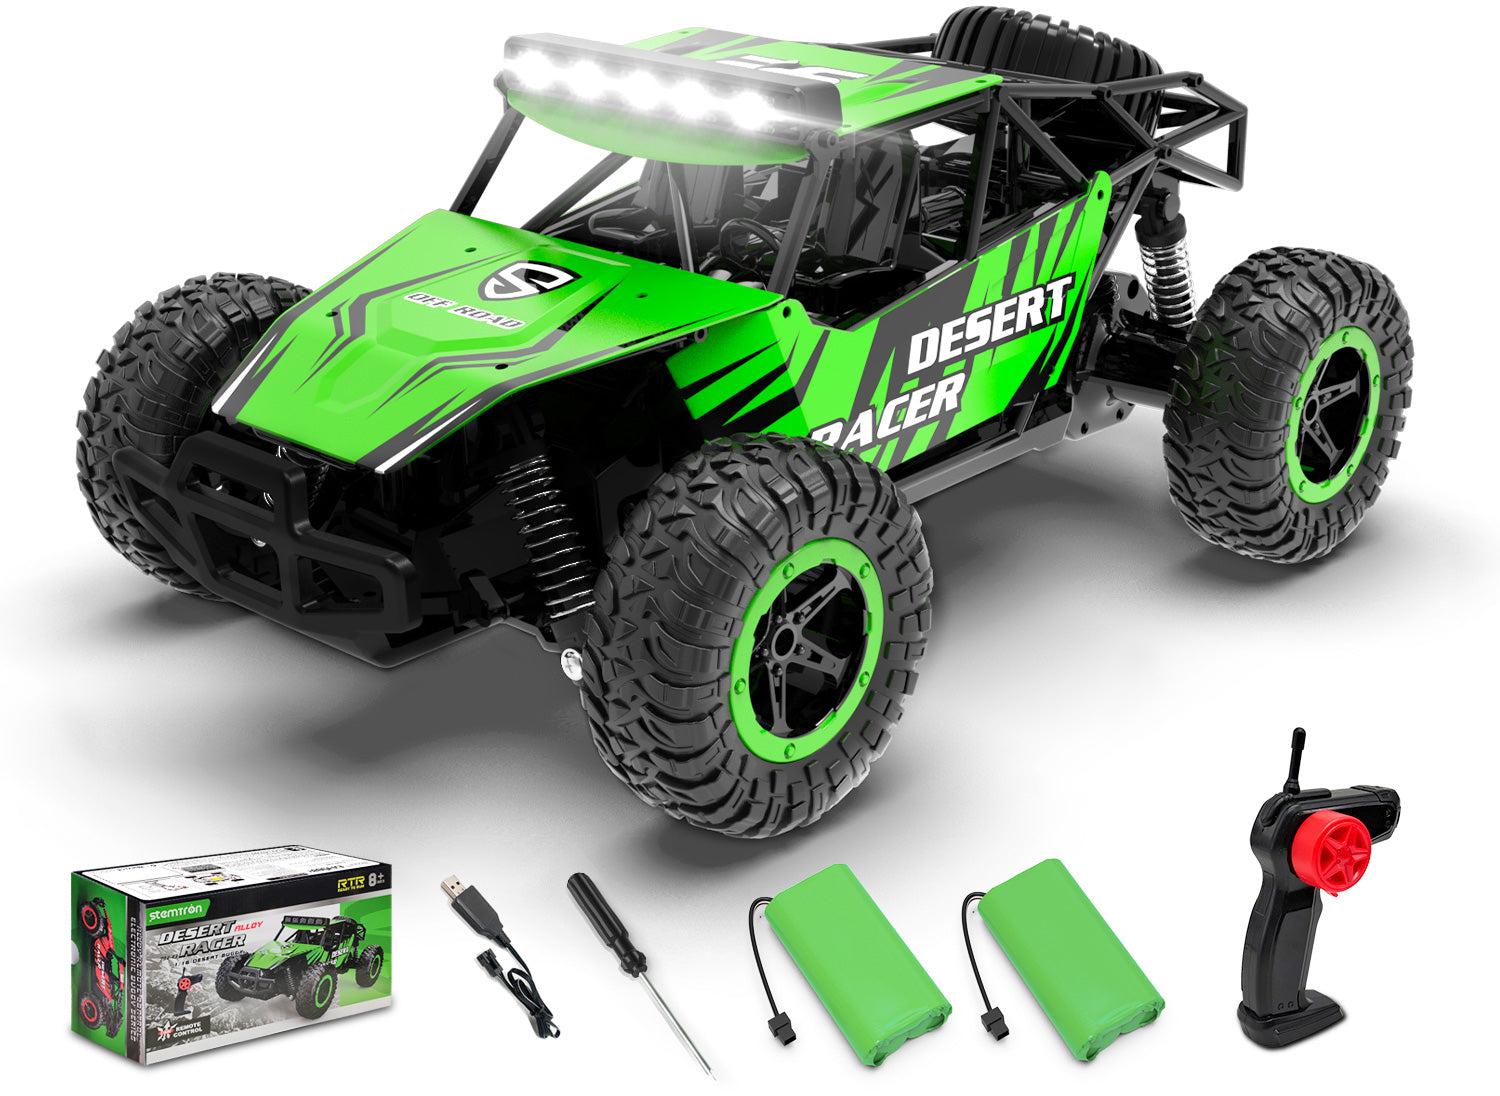 Crossy 1:16 Scale High Speed All Terrain RC Car | VOLANTEXRC OFFICIAL